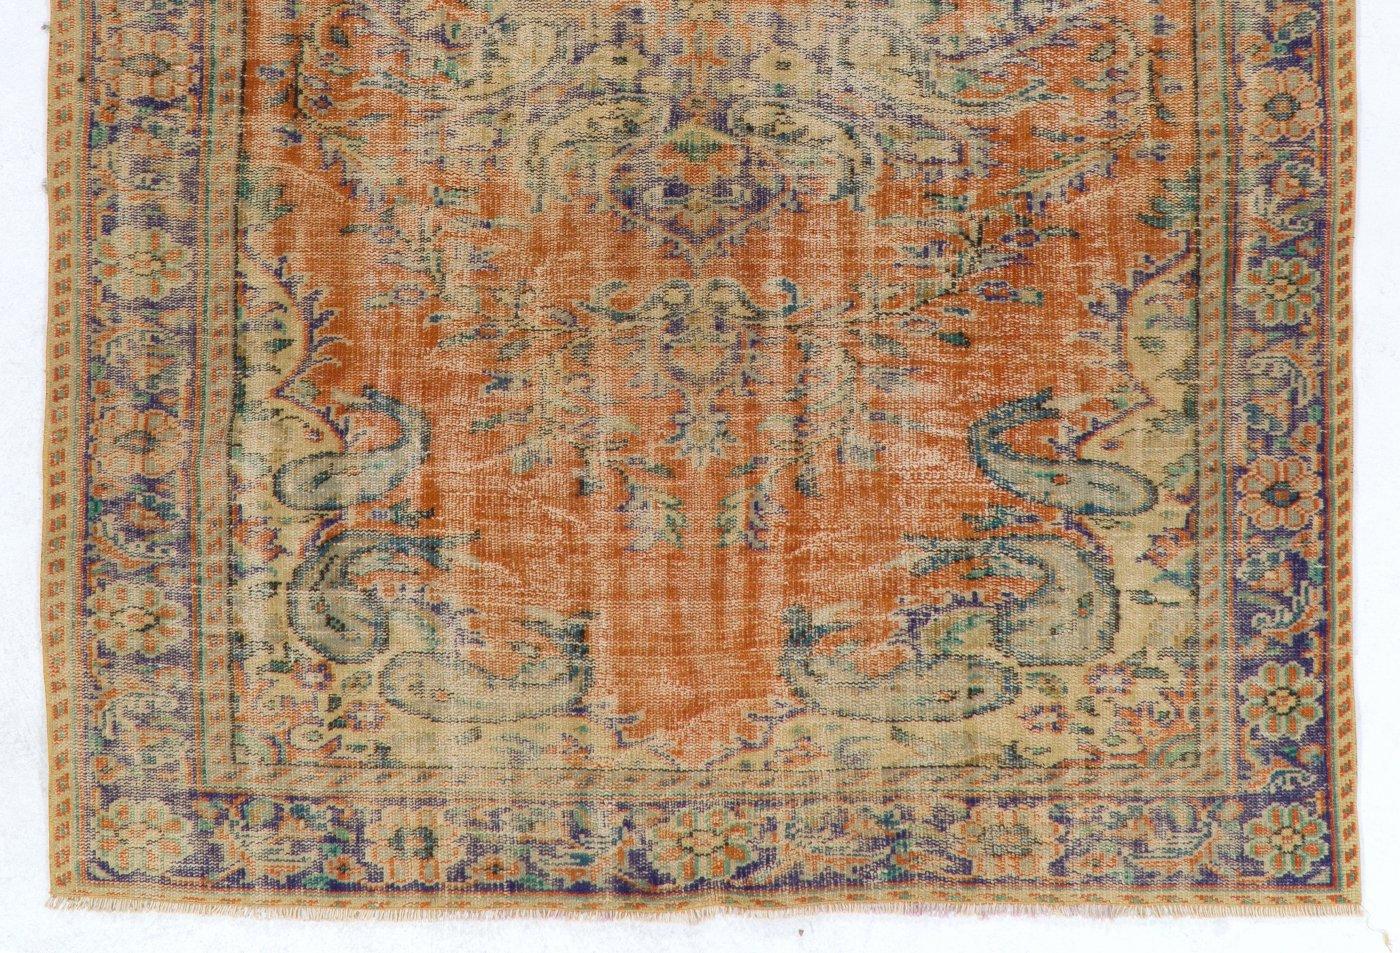 Hand-Knotted 6.4x9 ft Mid-20th Century Handmade Turkish Oushak Area Rug Made of Organic Wool For Sale